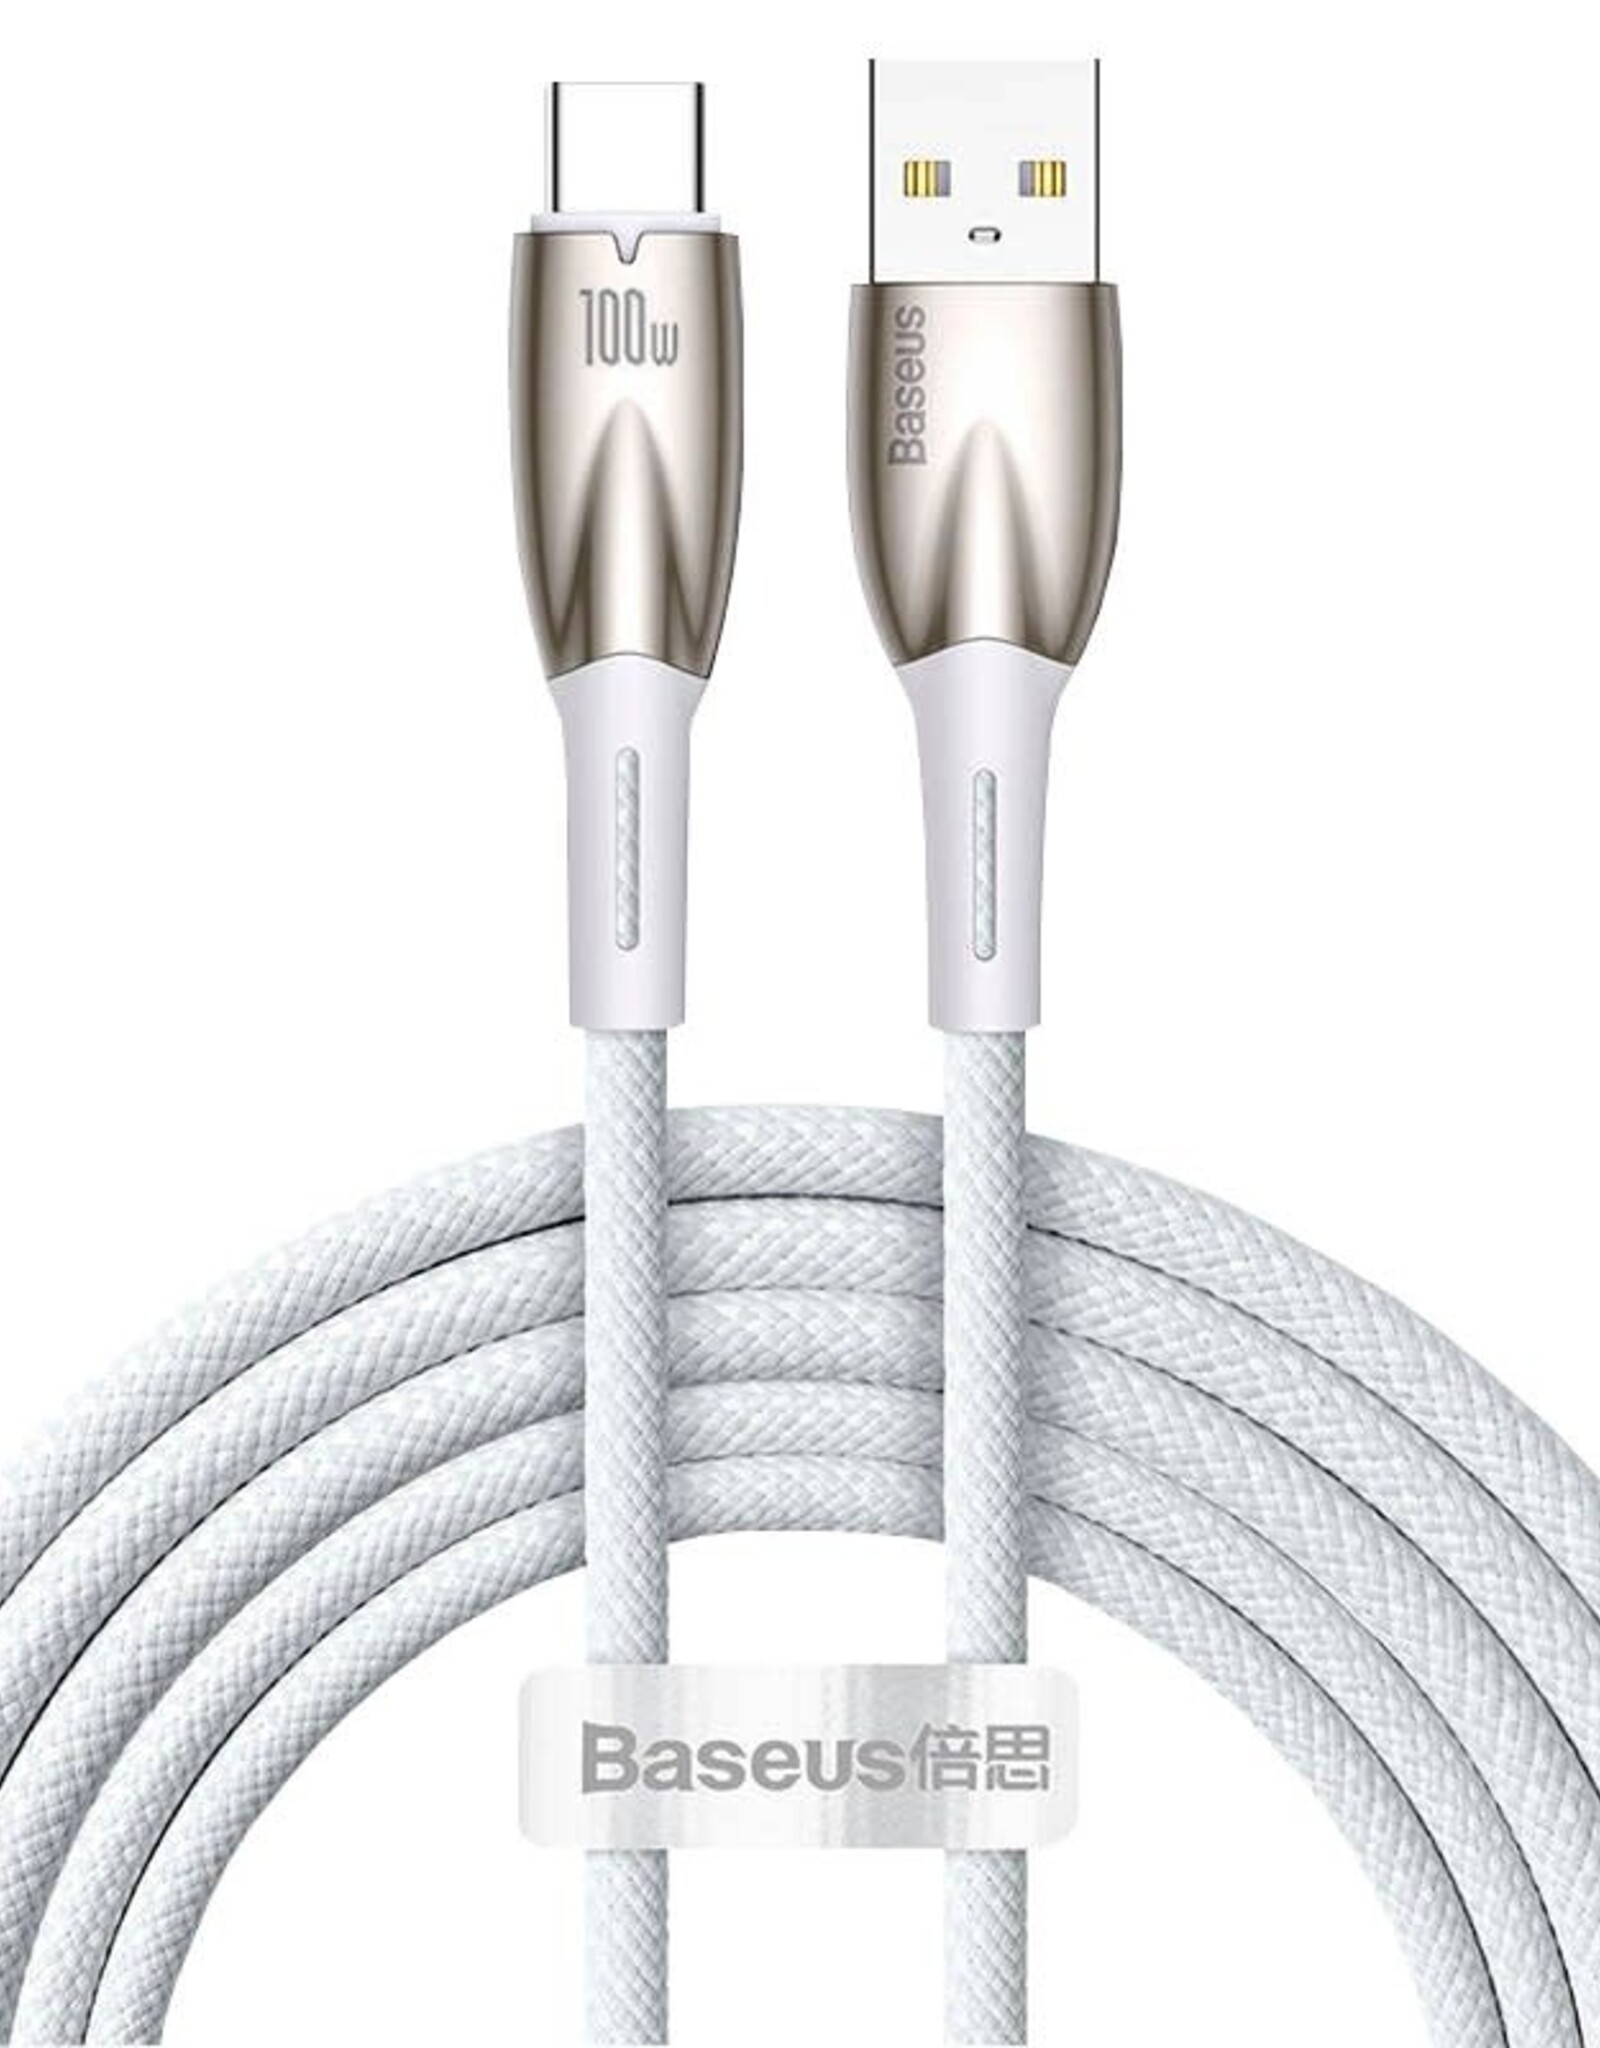 Baseus 100w Glimmer Series Fast Charging Data Cable usb to usb c 1m